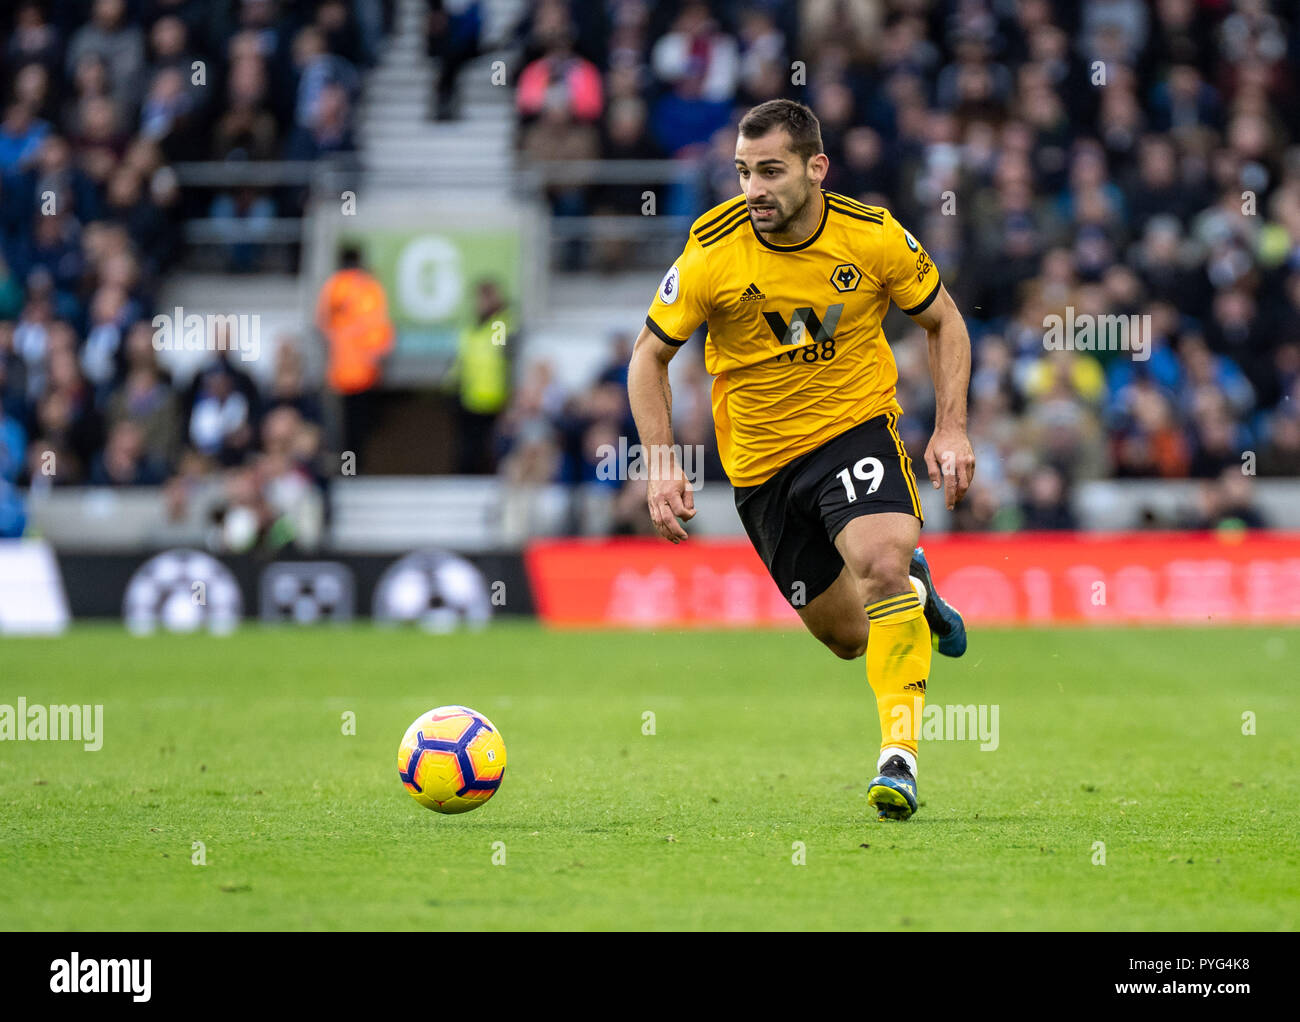 Brighton, UK. 27th October 2018. Jonny Otto of Wolverhampton Wanderers during the Premier League match between Brighton and Hove Albion and Wolverhampton Wanderers at the AMEX Stadium, Brighton, England on 27 October 2018. Photo by Liam McAvoy. Credit: UK Sports Pics Ltd/Alamy Live News Stock Photo